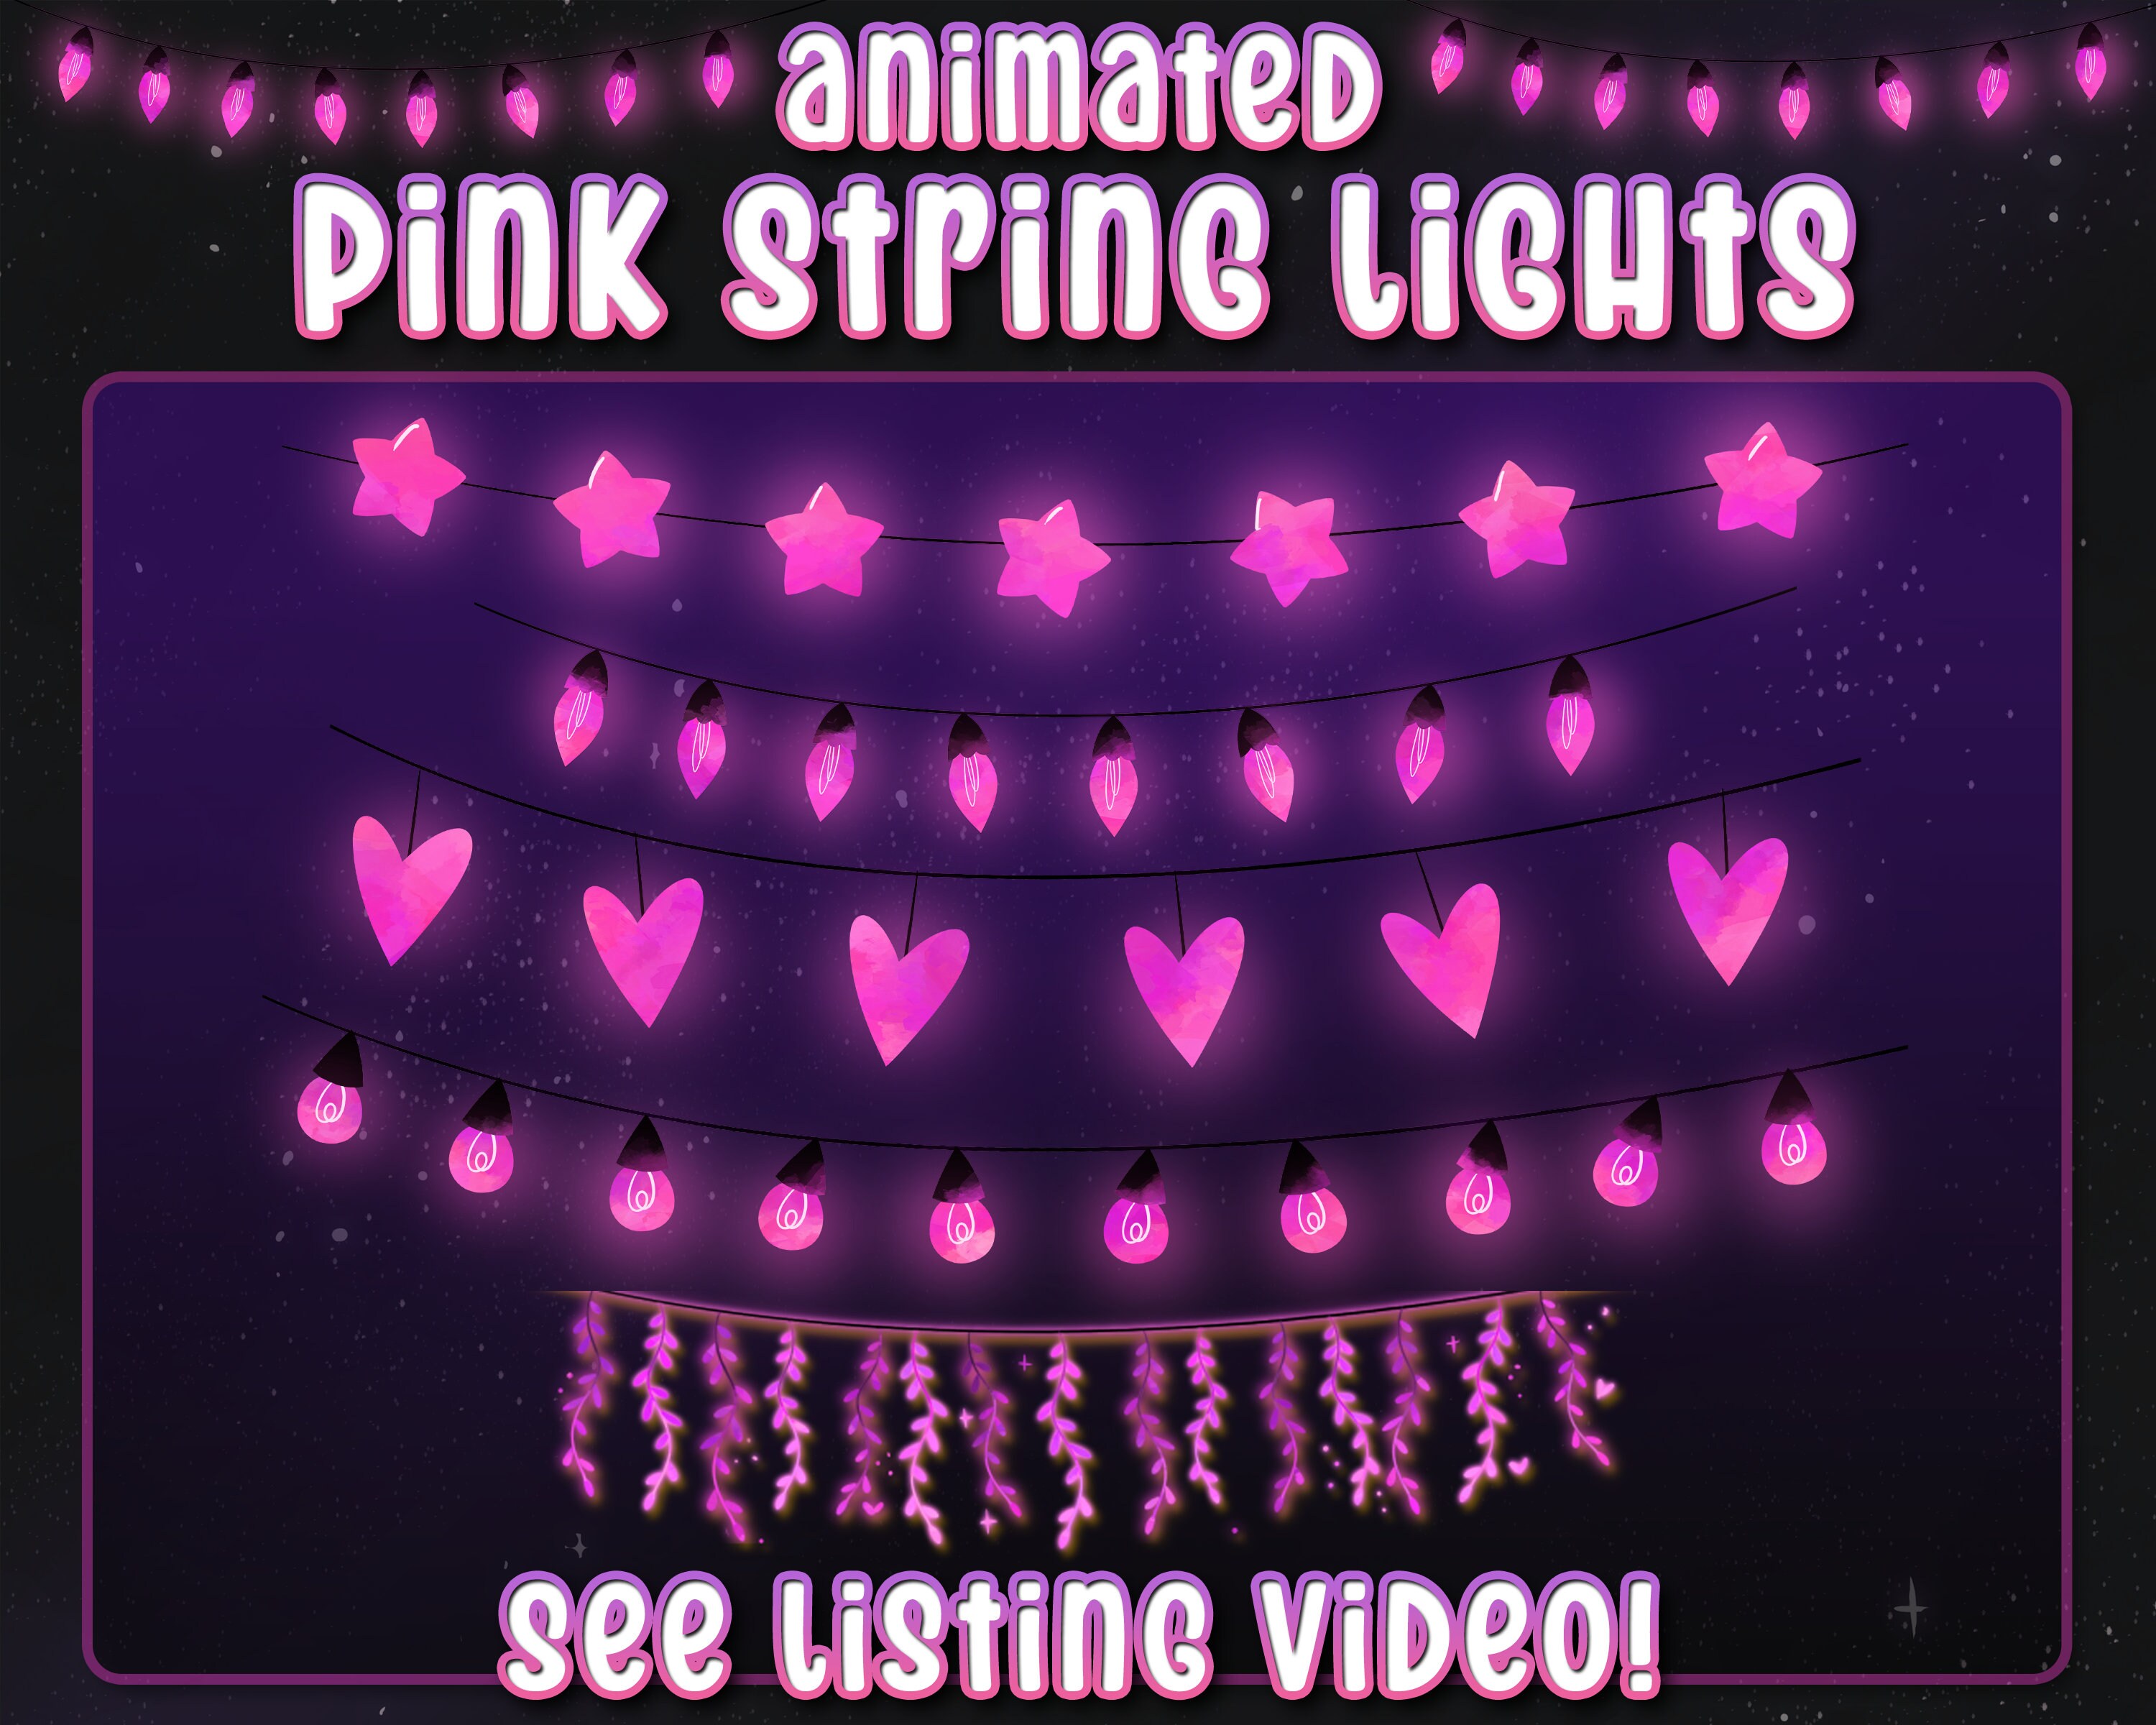 Resnice Pink Fairy Lights 100 Ft Plug In Indoor Long Electric String L —  CHIMIYA